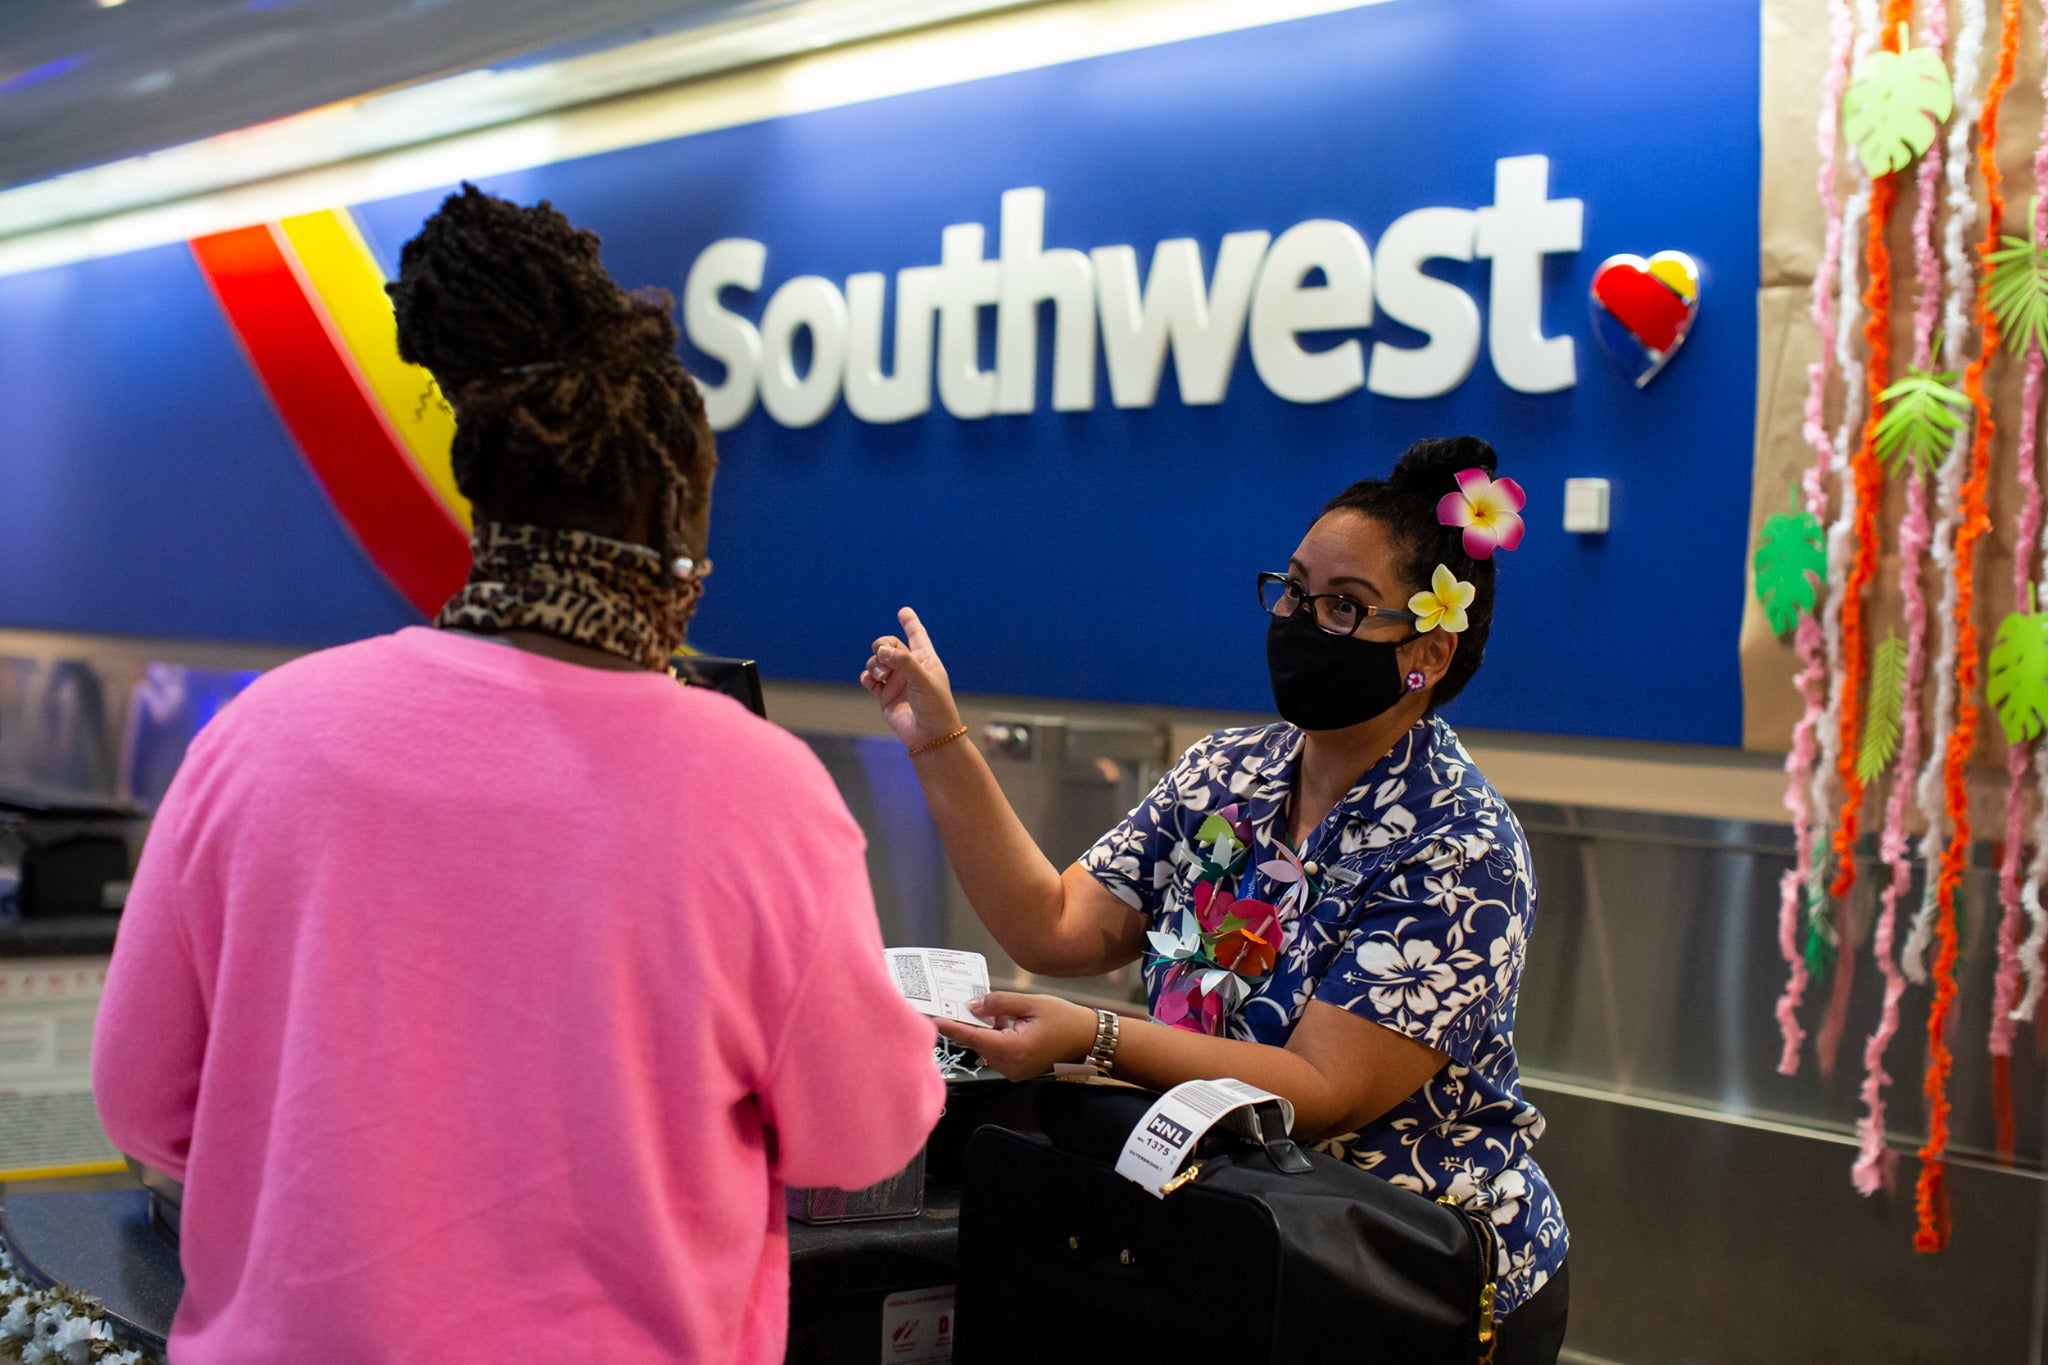 Southwest check in agent